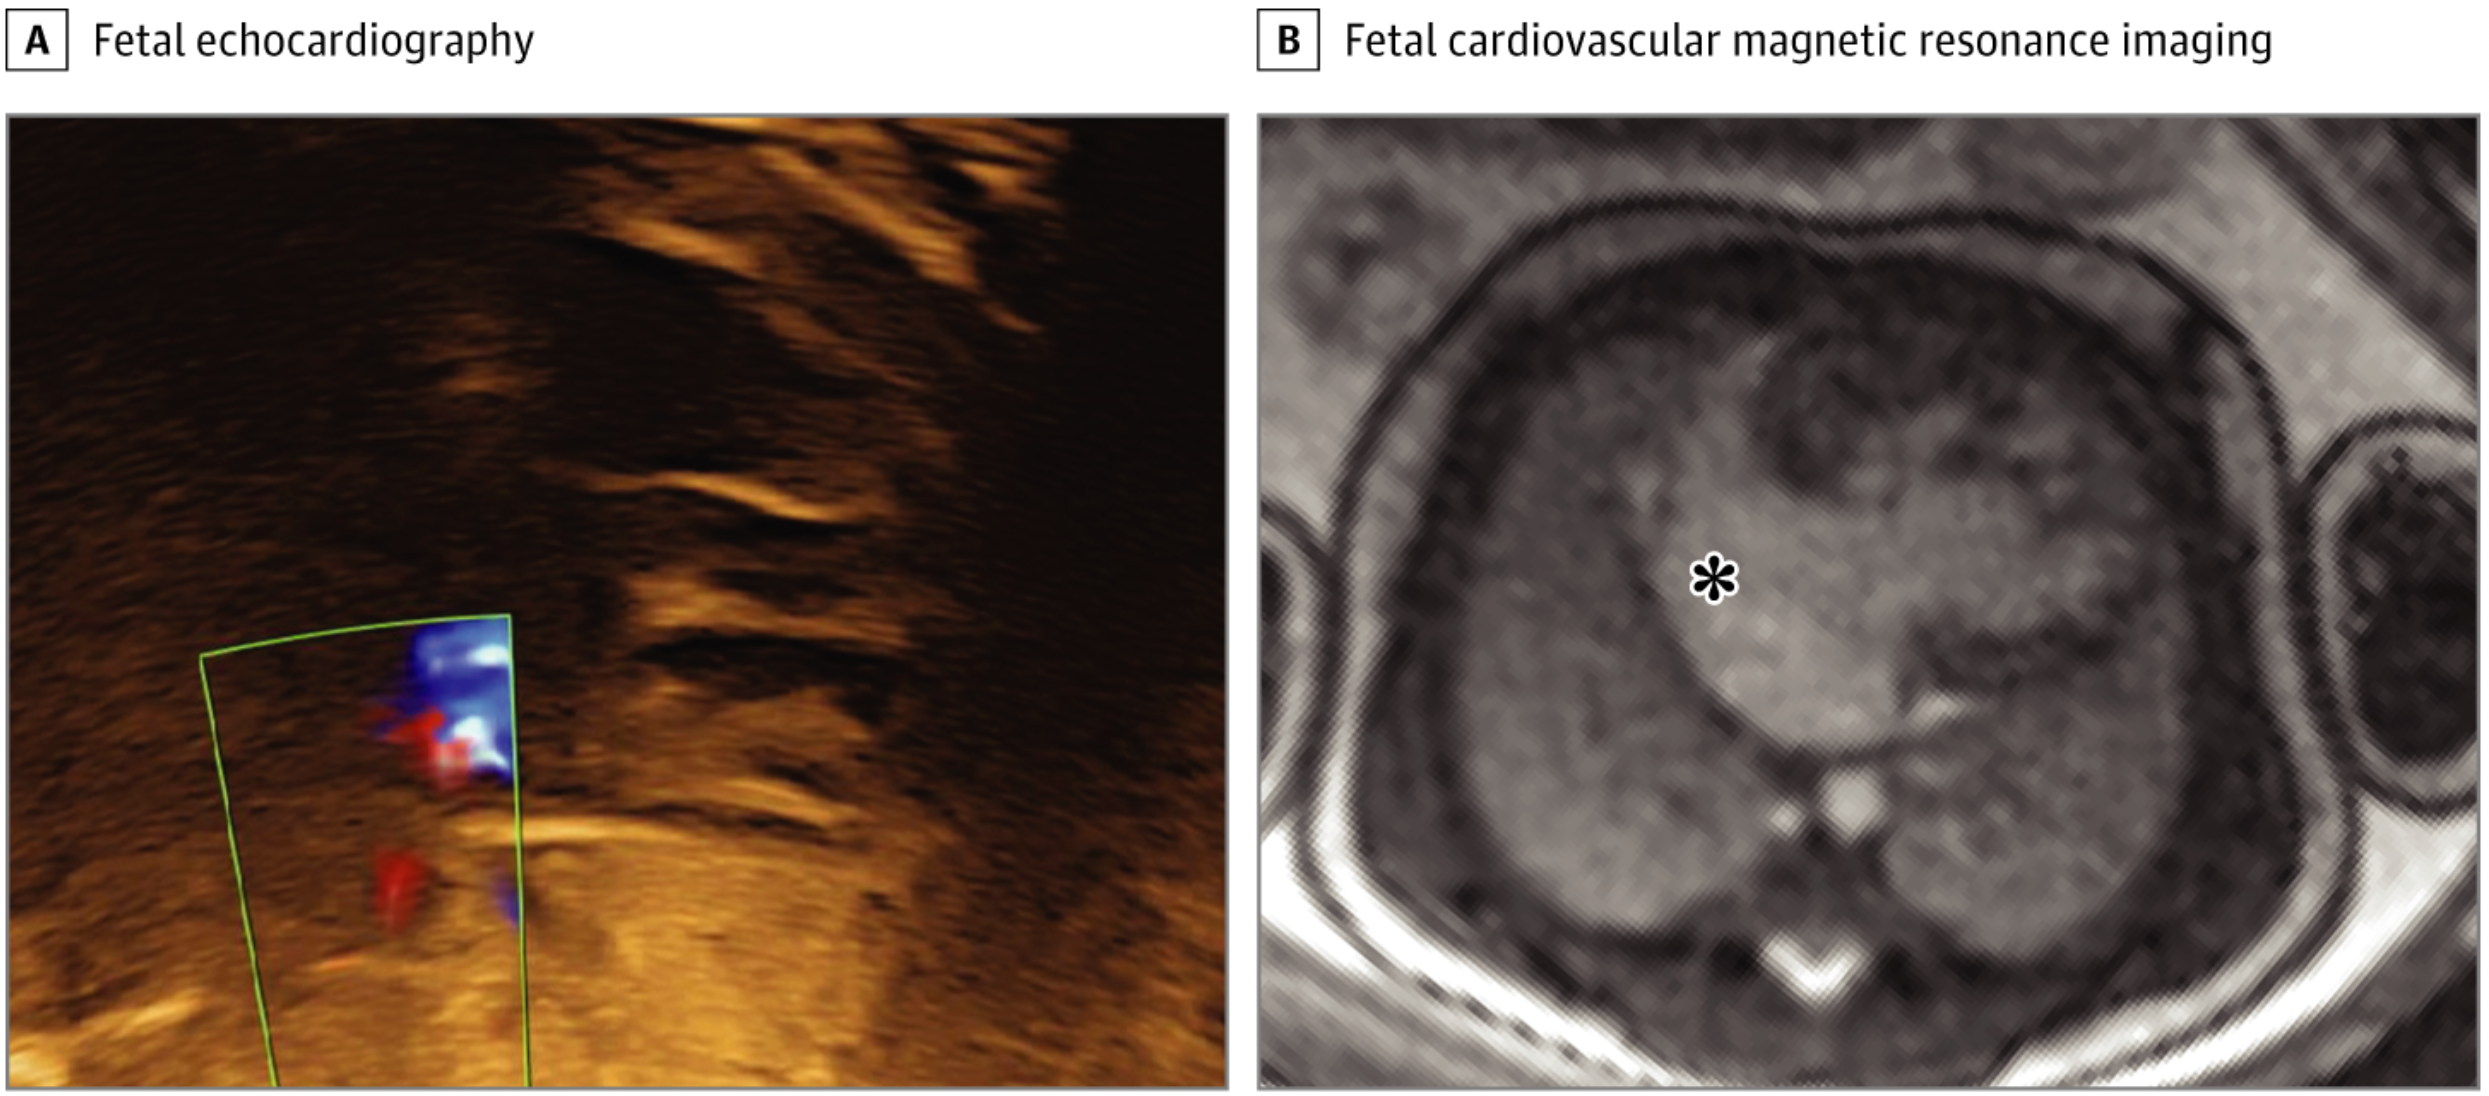 Fetal echocardiography could not visualize the atrial cavity or Doppler flow across the atrial septum due to poor acoustic windows (A). Fetal cardiovascular magnetic resonance showed a large interatrial communication, indicated by the asterisk, and no nutmeg pattern (B). Therefore, the risk of restrictive atrial septum was considered low (albeit a membrane could not be ruled out), and the fetus was planned for a vaginal delivery without cardiac catheterization laboratory on standby.

Credit: JAMA Network Open